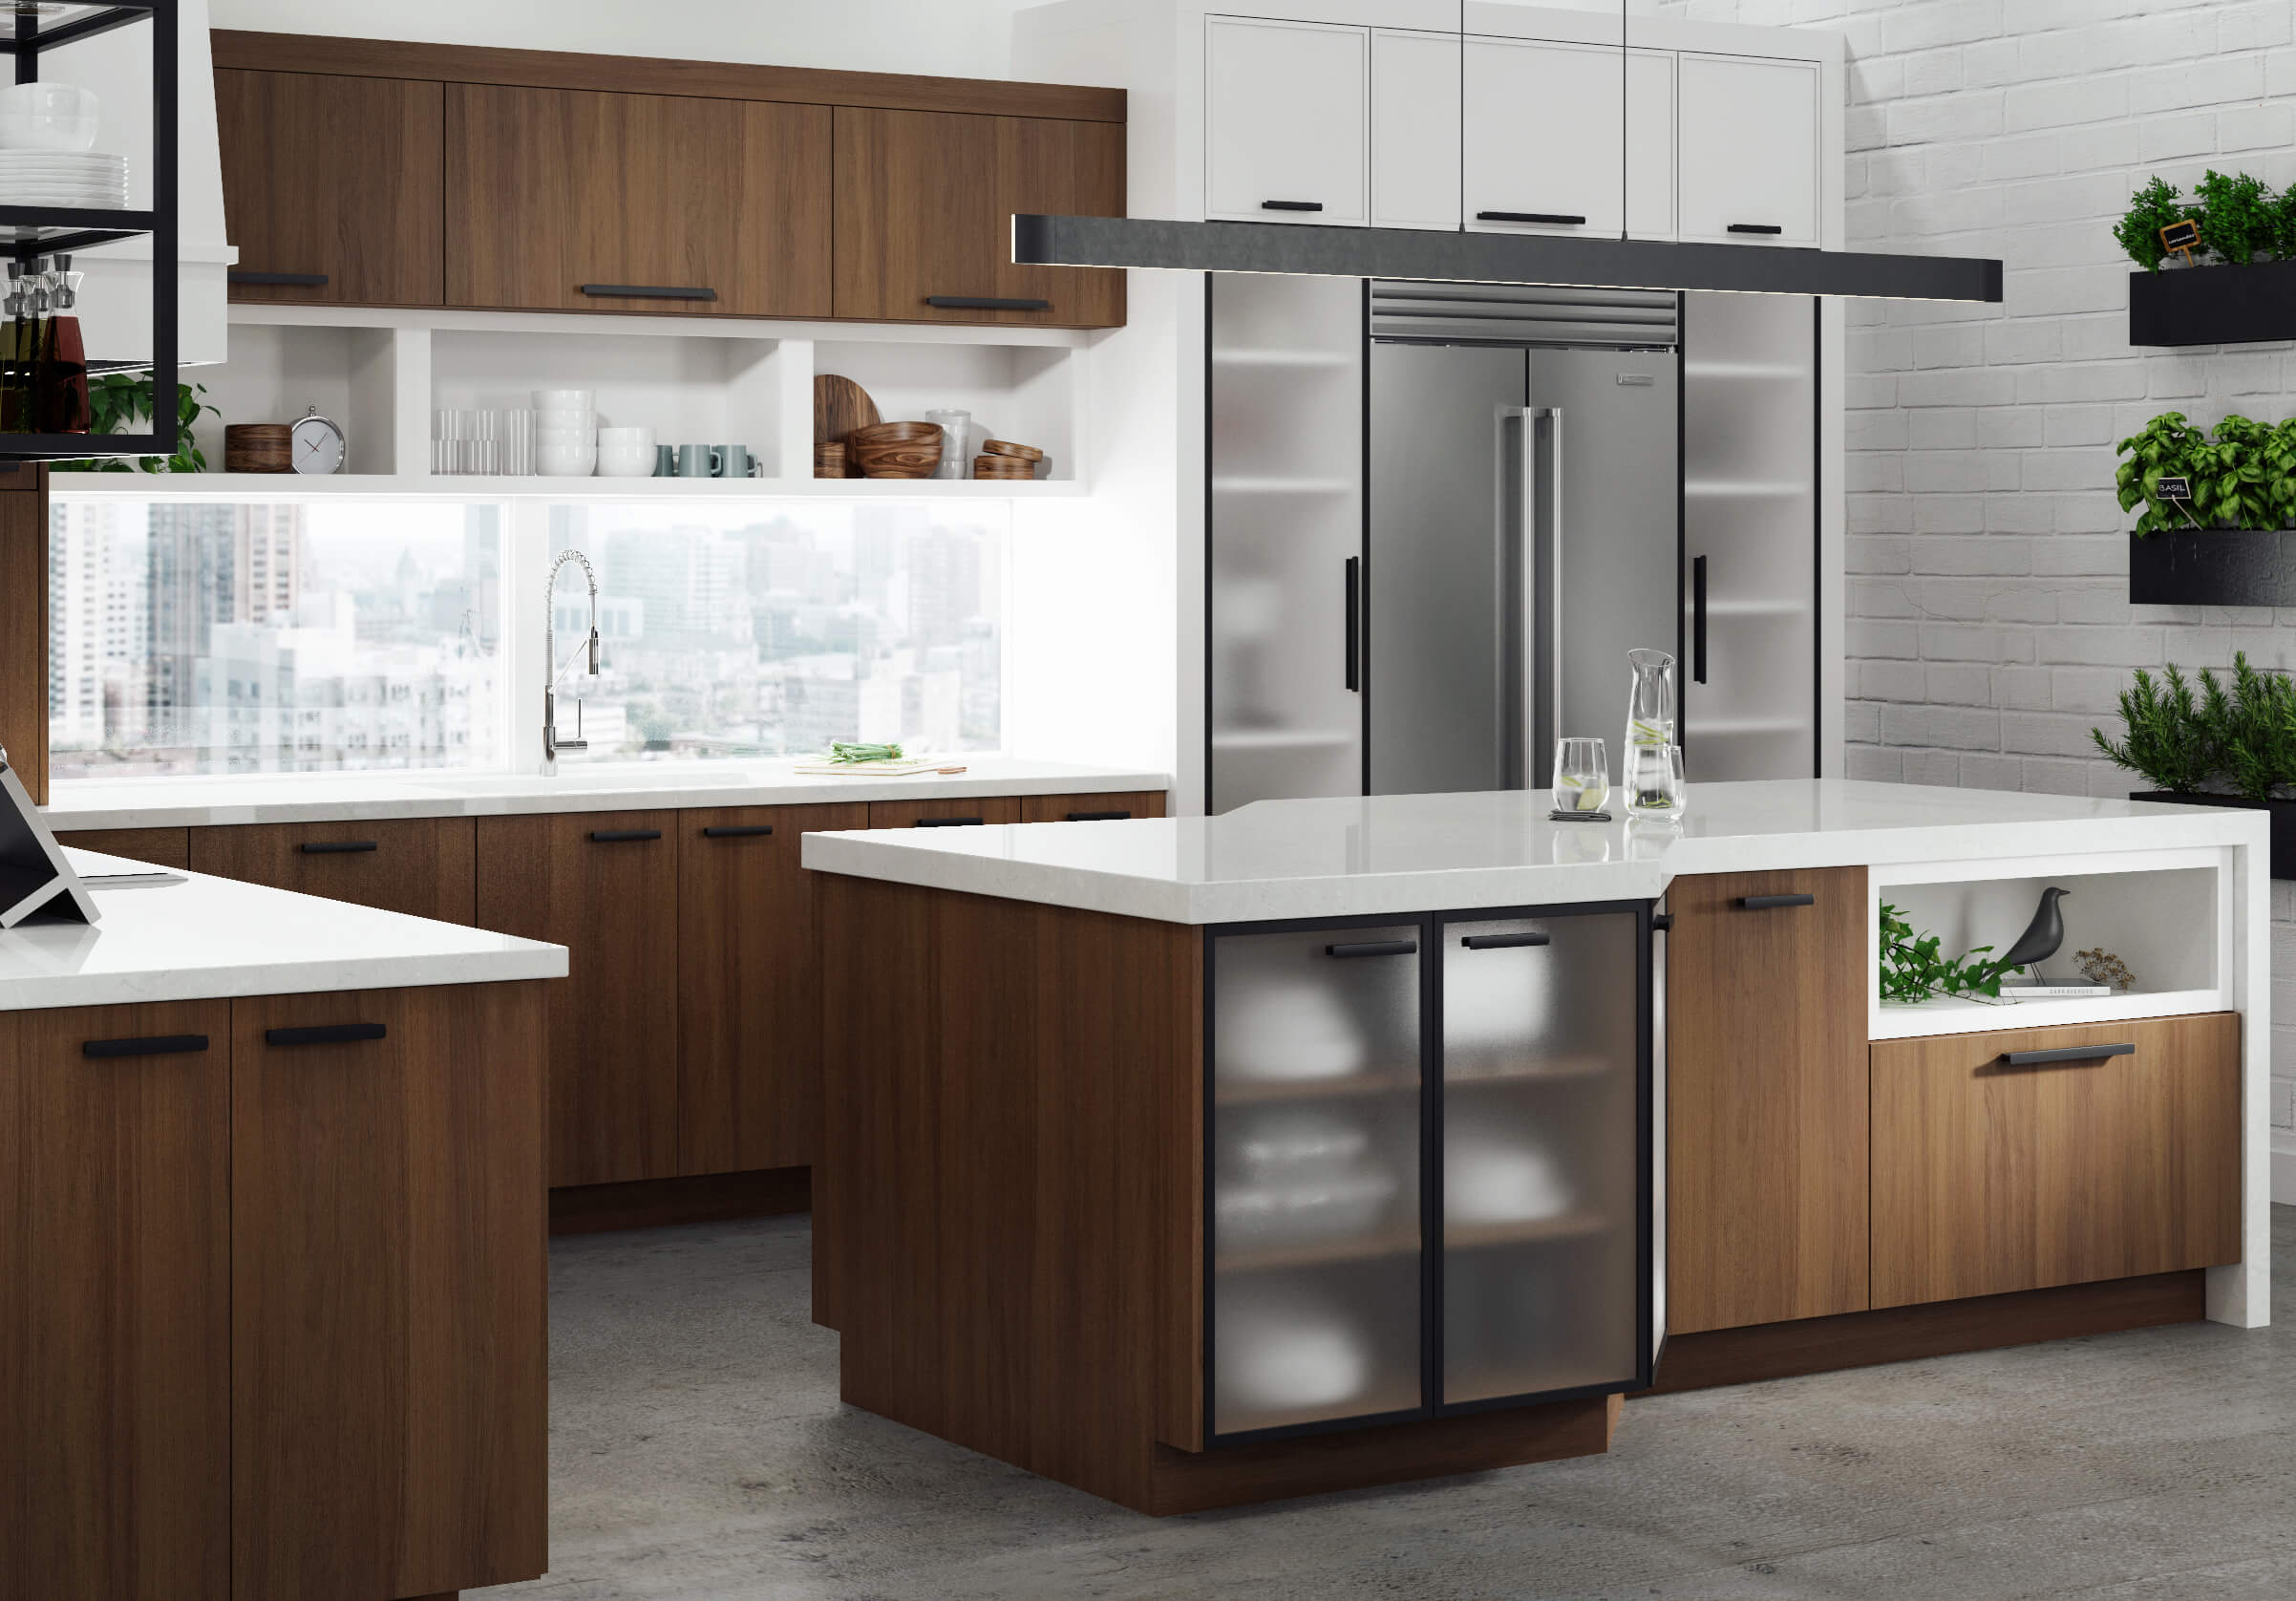 A city loft is remodeled with an angled kitchen island with black metal framed cabinet doors and walnut veneer cabinets.